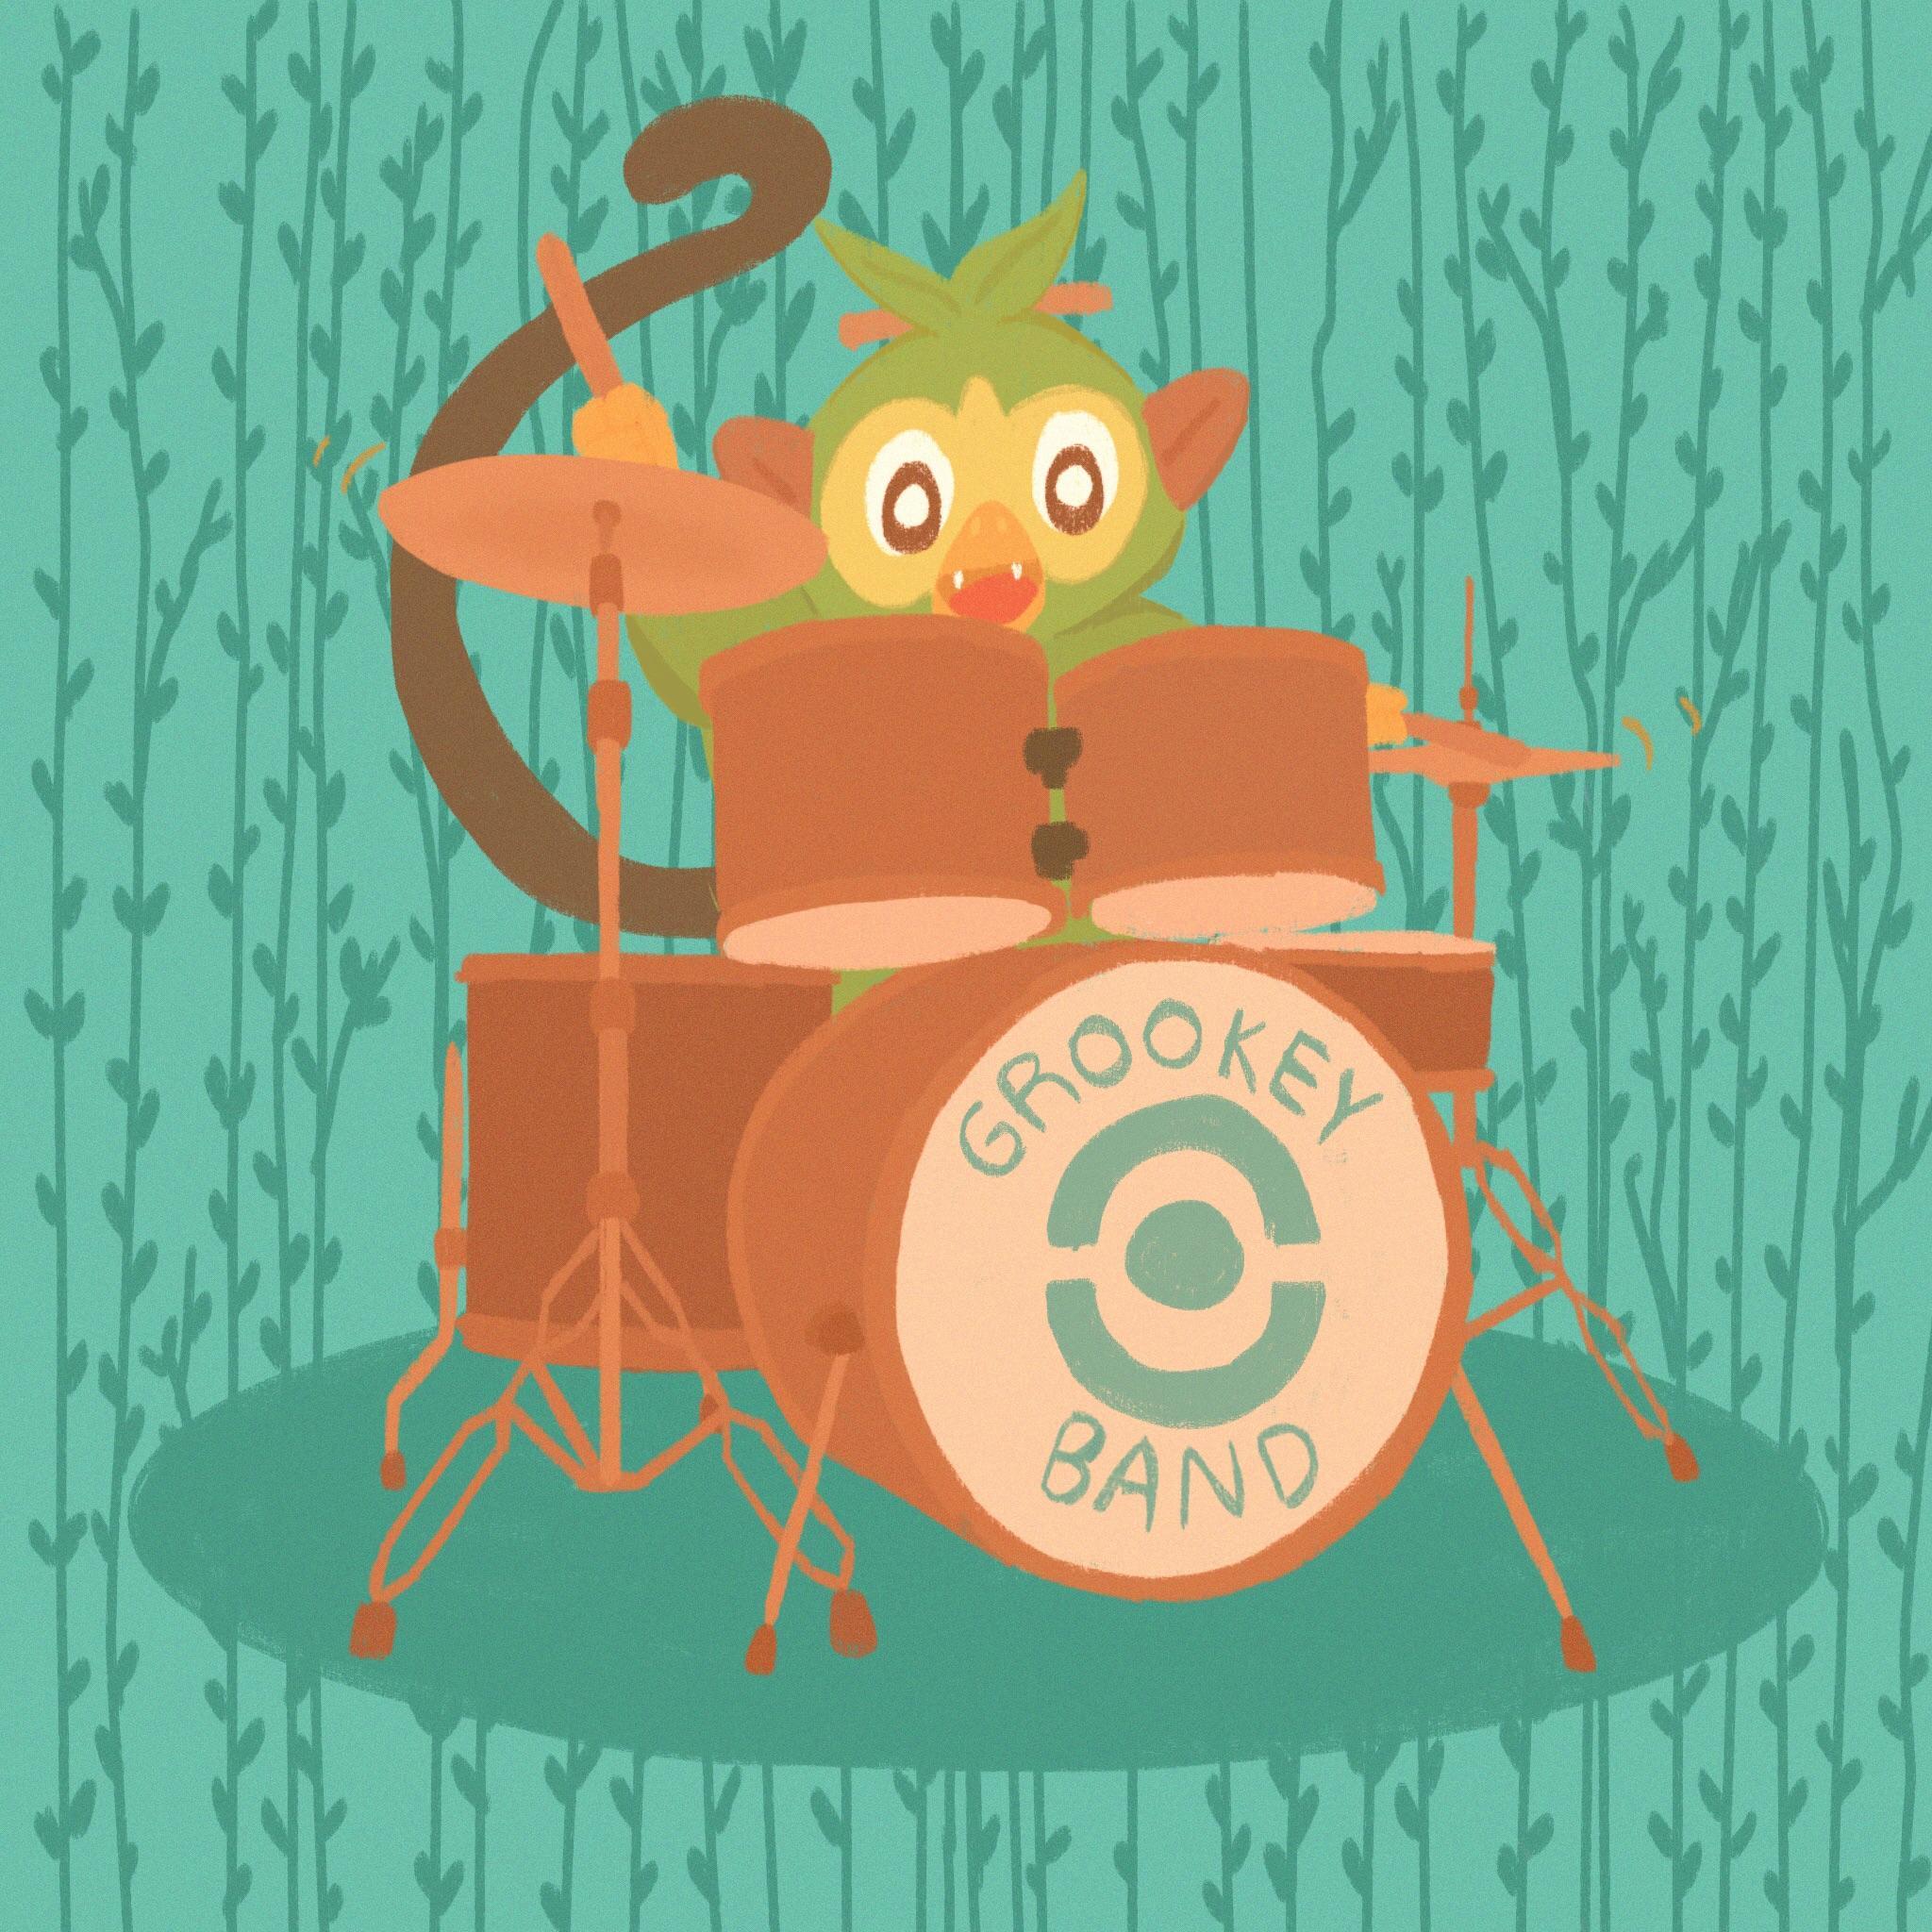 Grookey loves the drums